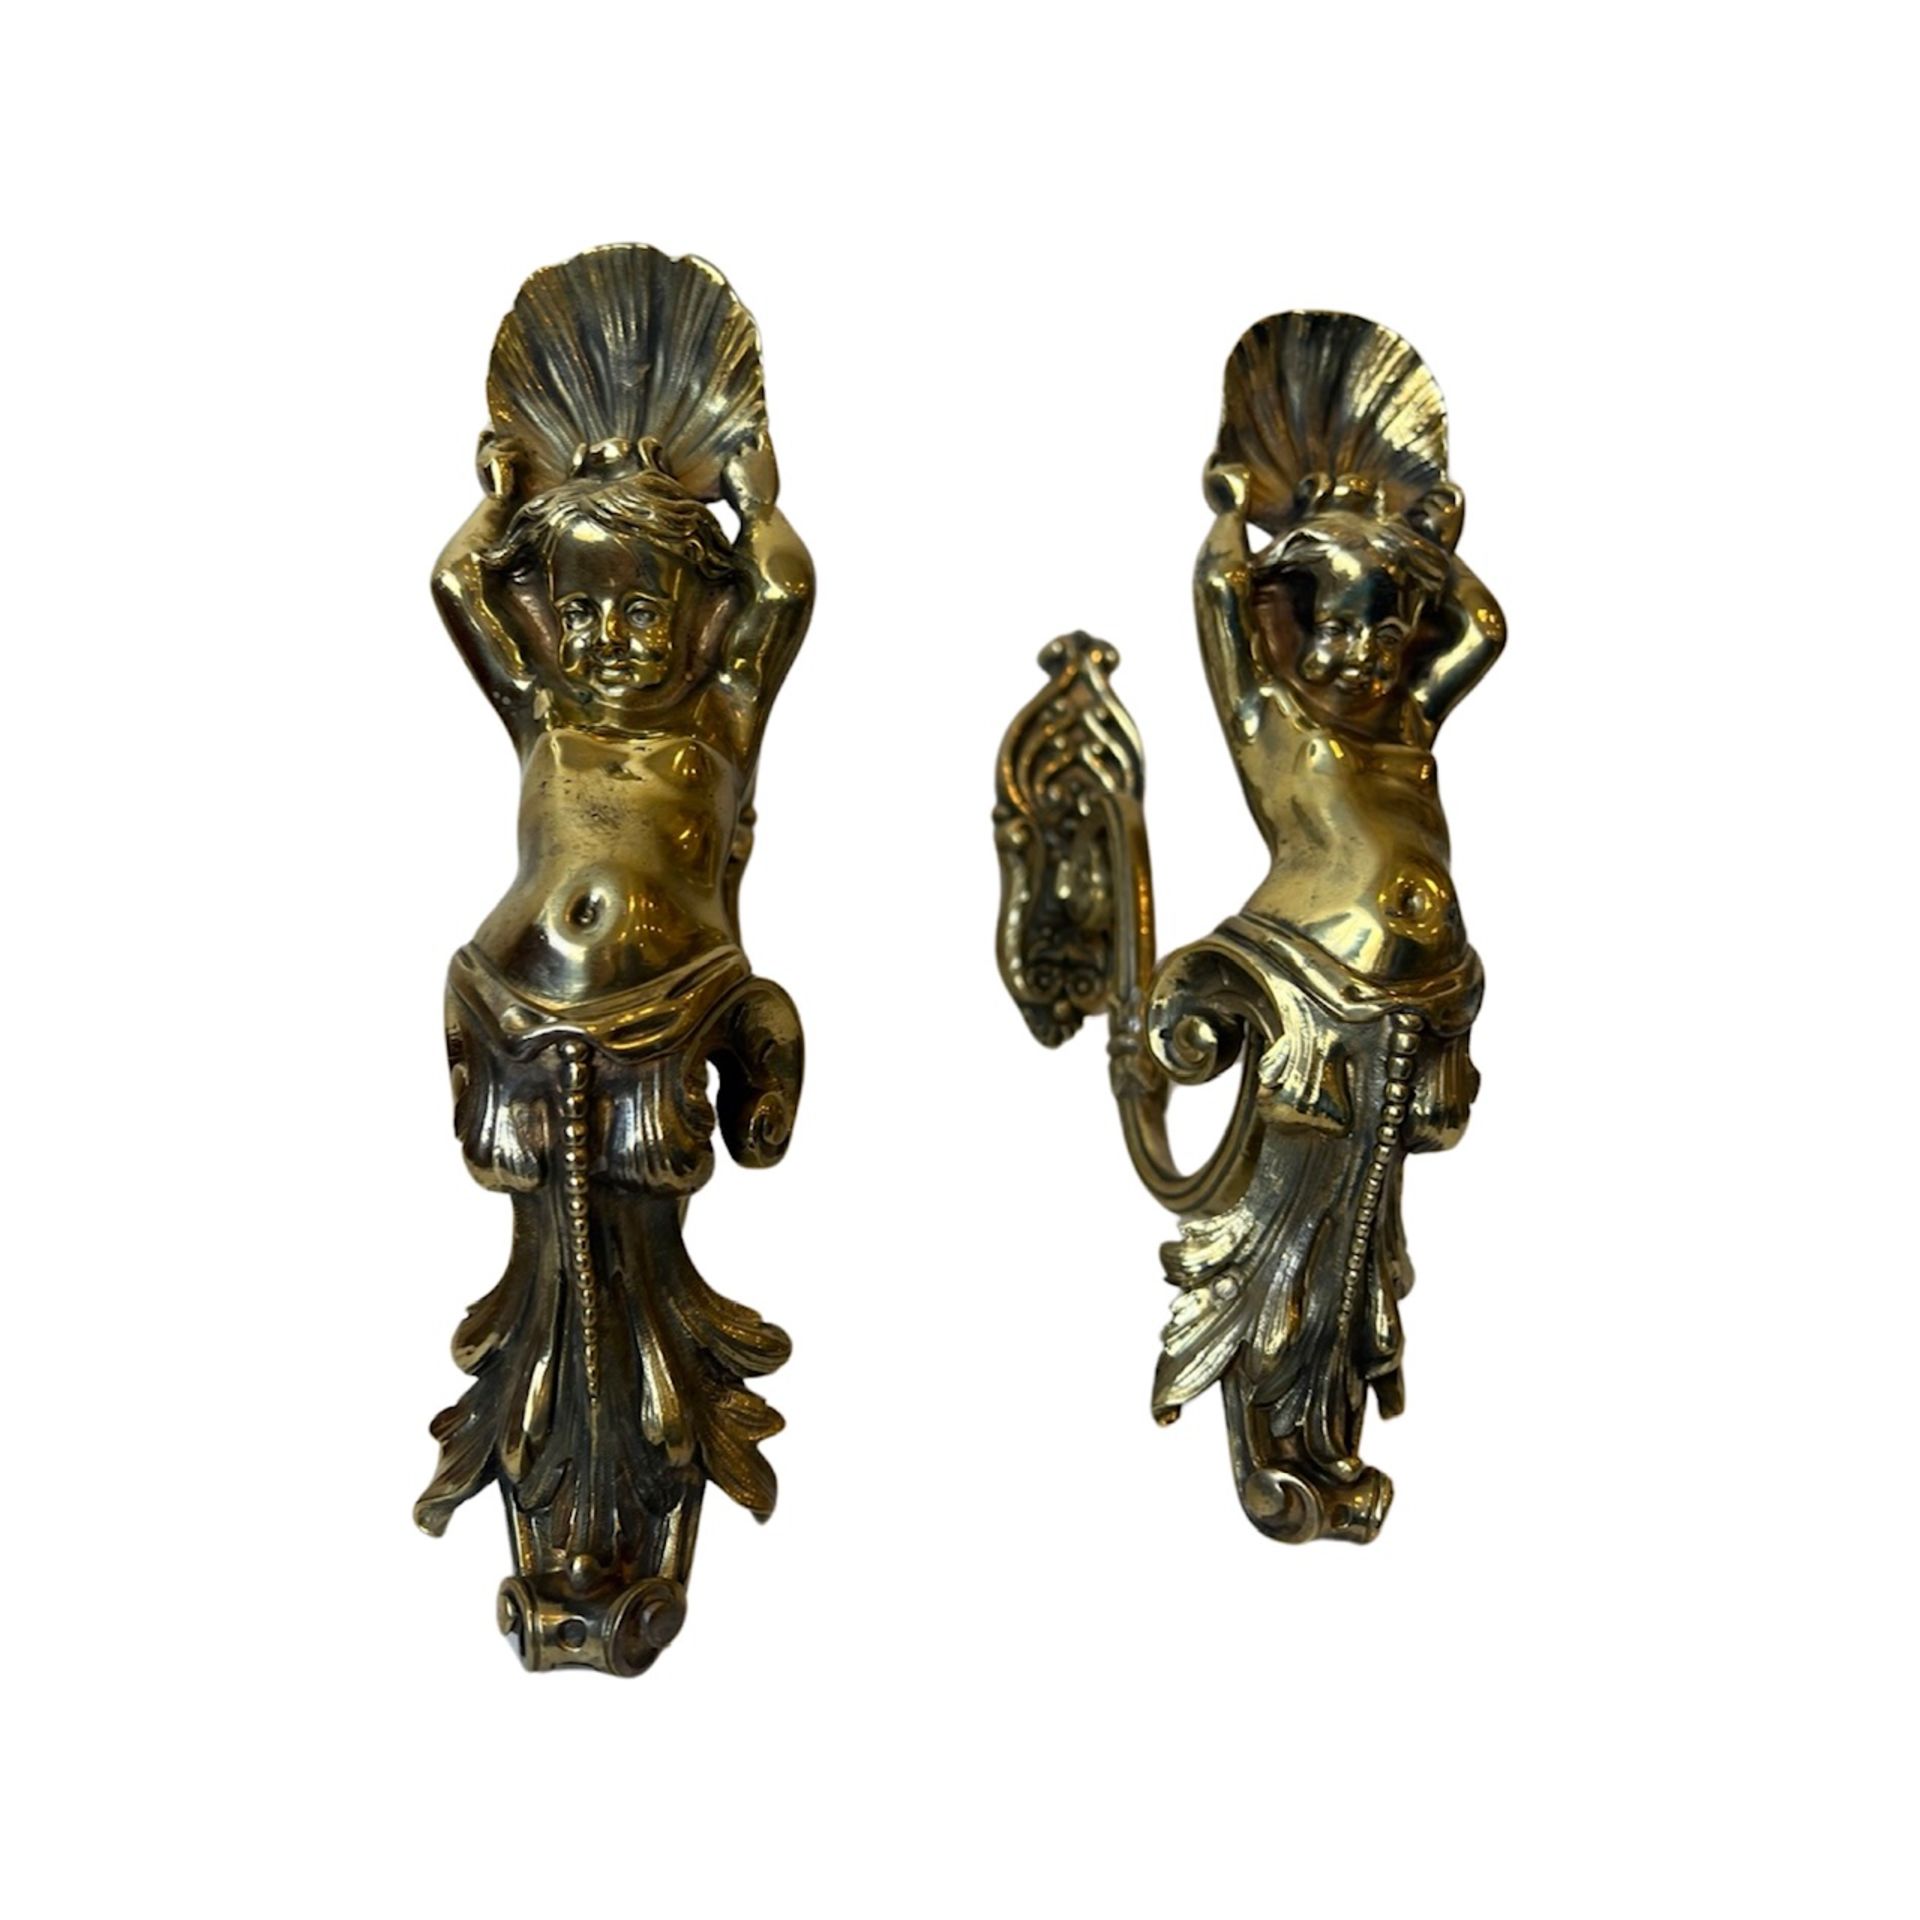 A PAIR OF LATE 19TH CENTURY FRENCH BRONZE CURTAIN TIE BACKS - Image 4 of 7